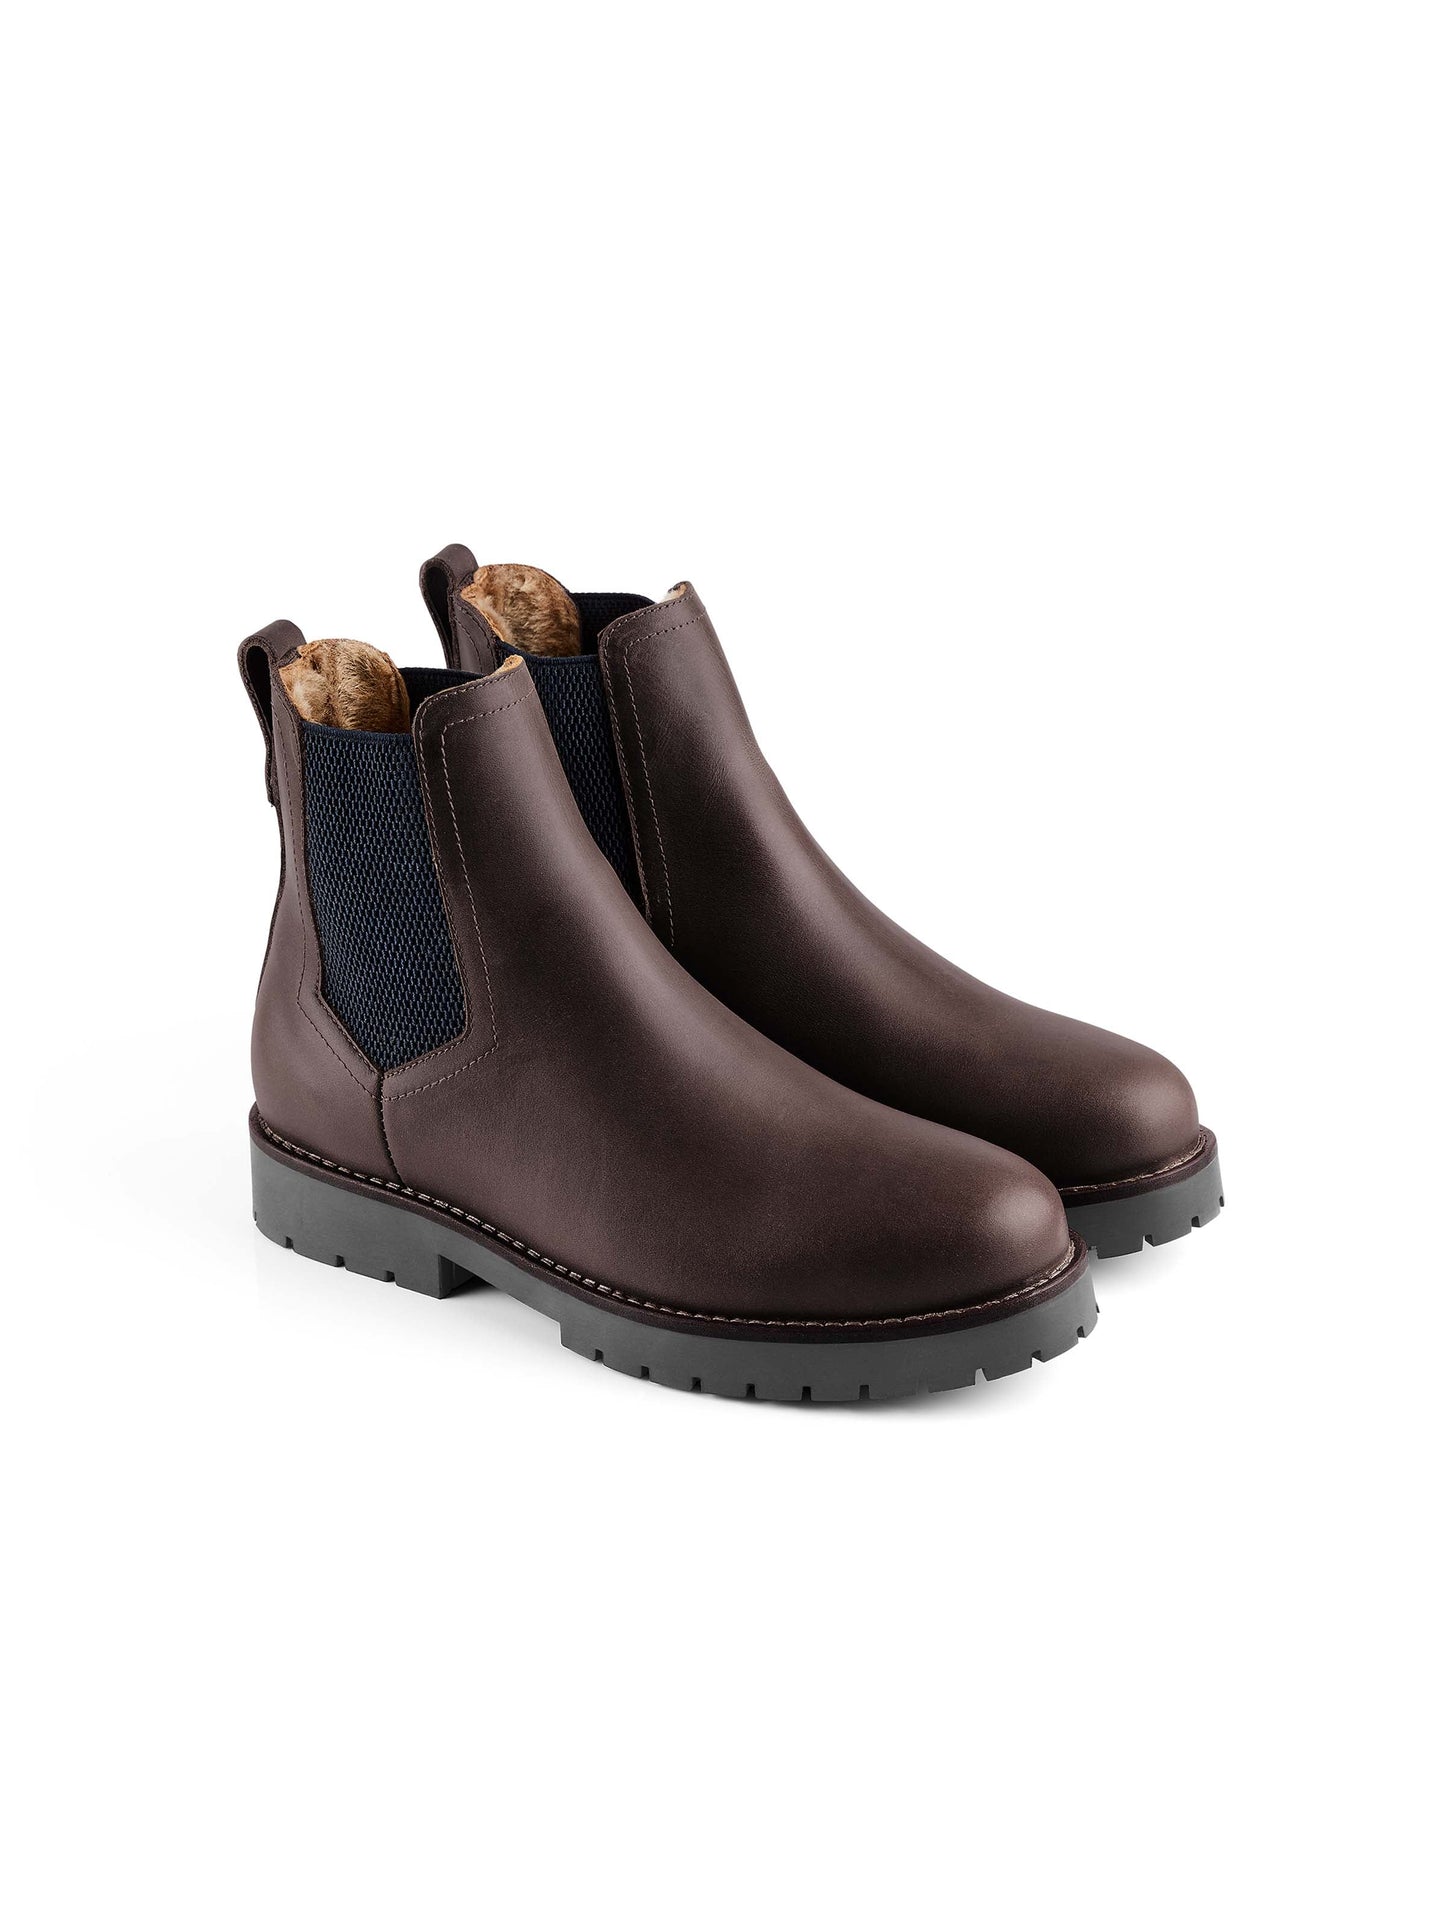 The Boudica Boot - Mahogany Leather